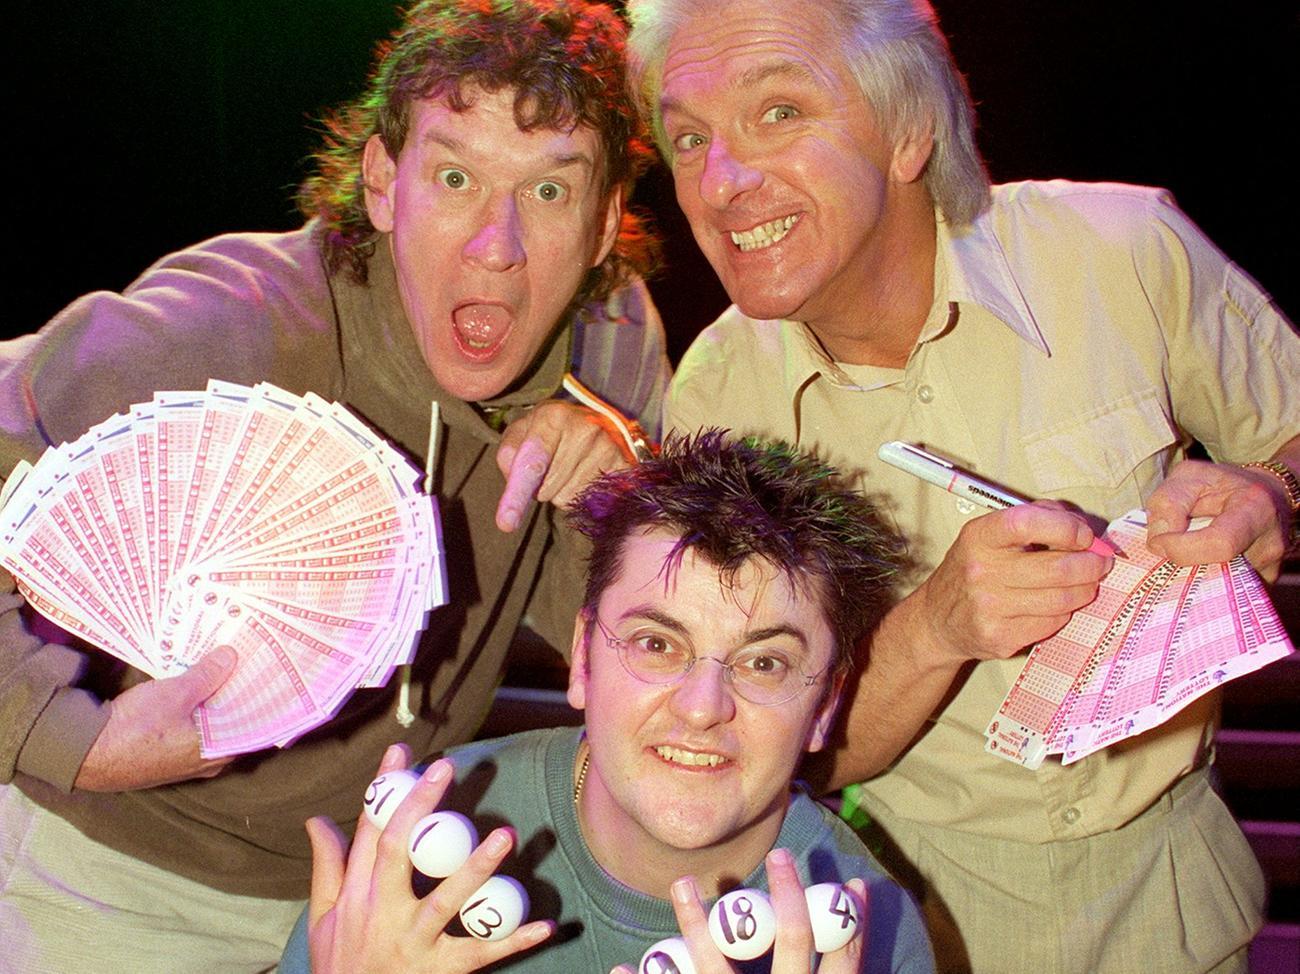 In 1998 stars from the Grand Theatres Comedy Bonanza prepared for the arrival of the National Lottery Draw with their own jackpot selection.